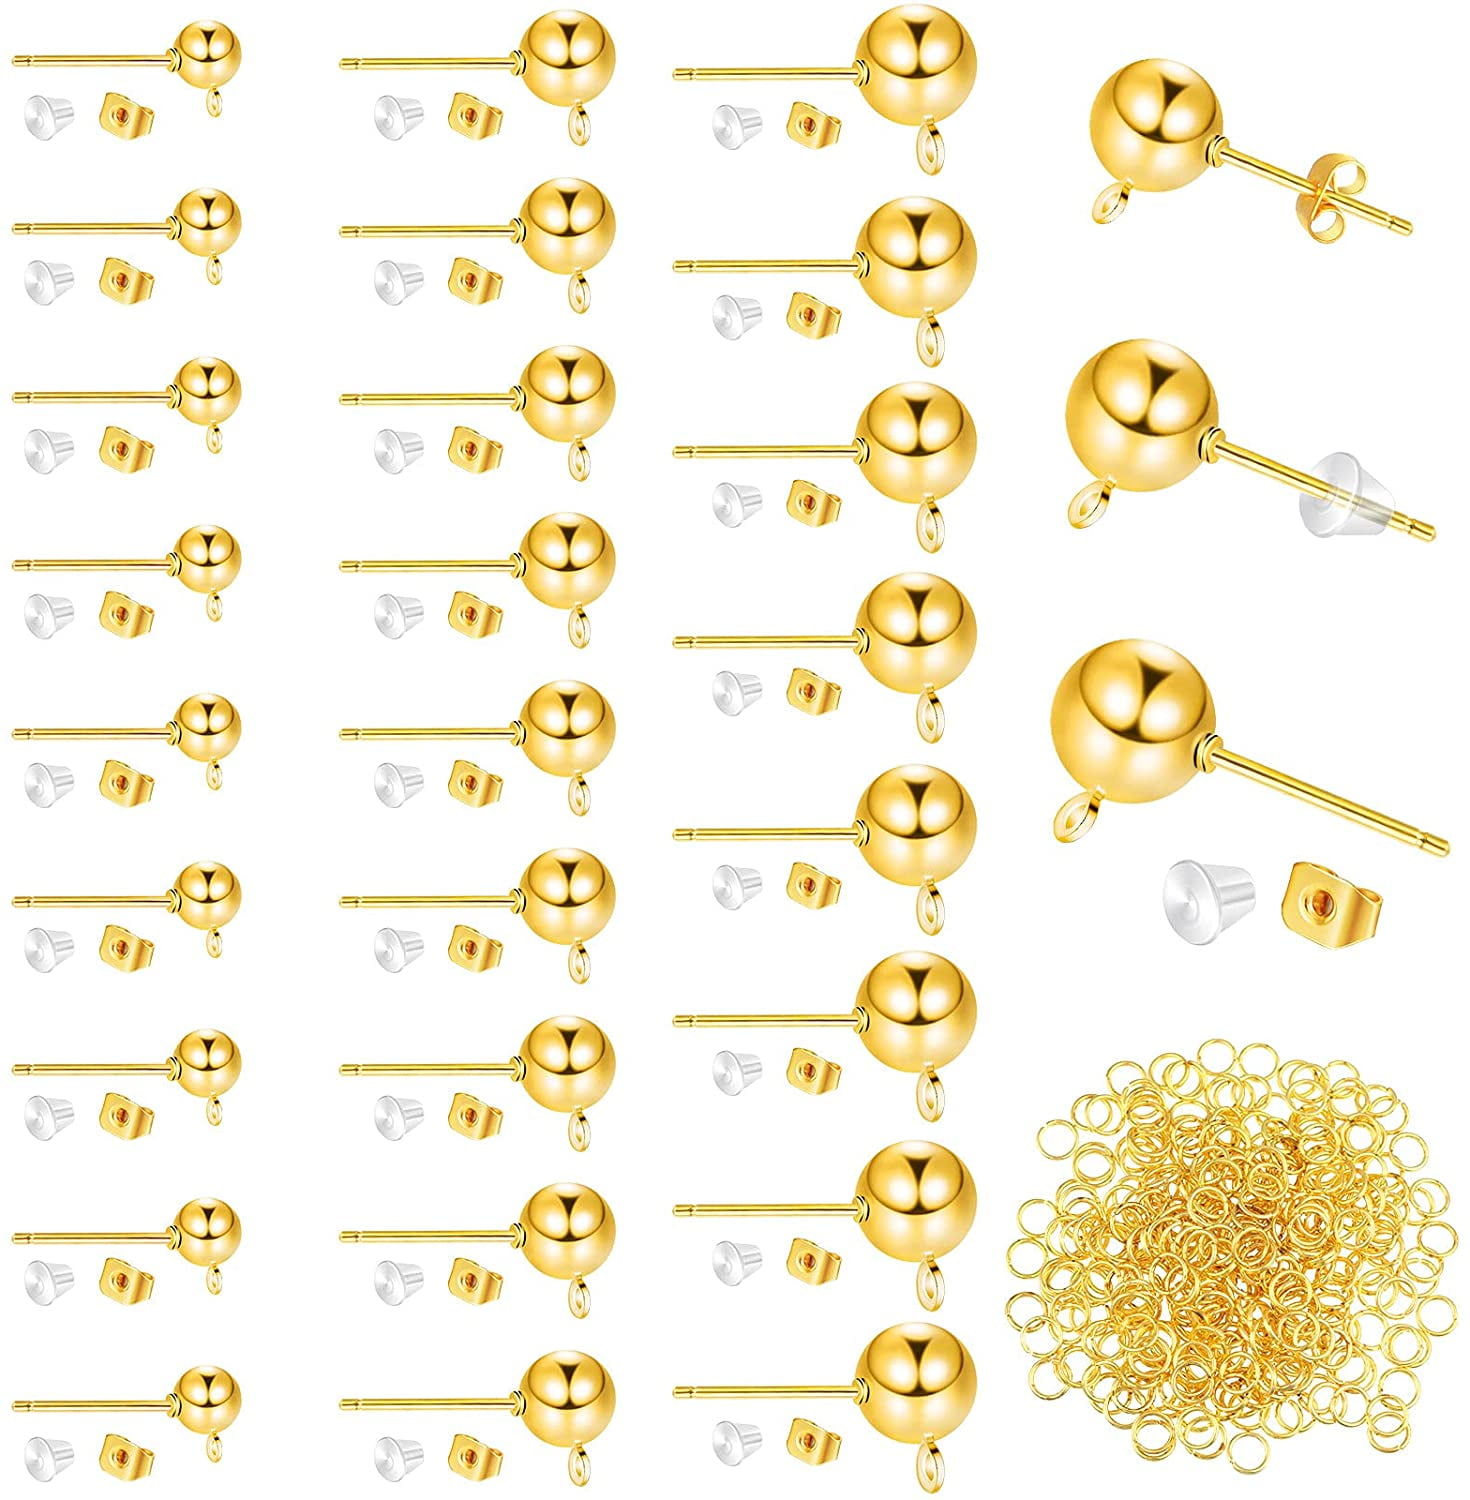 Oubaka 300Pcs Ball Post Earring Studs for Jewelry Making,3 Sizes